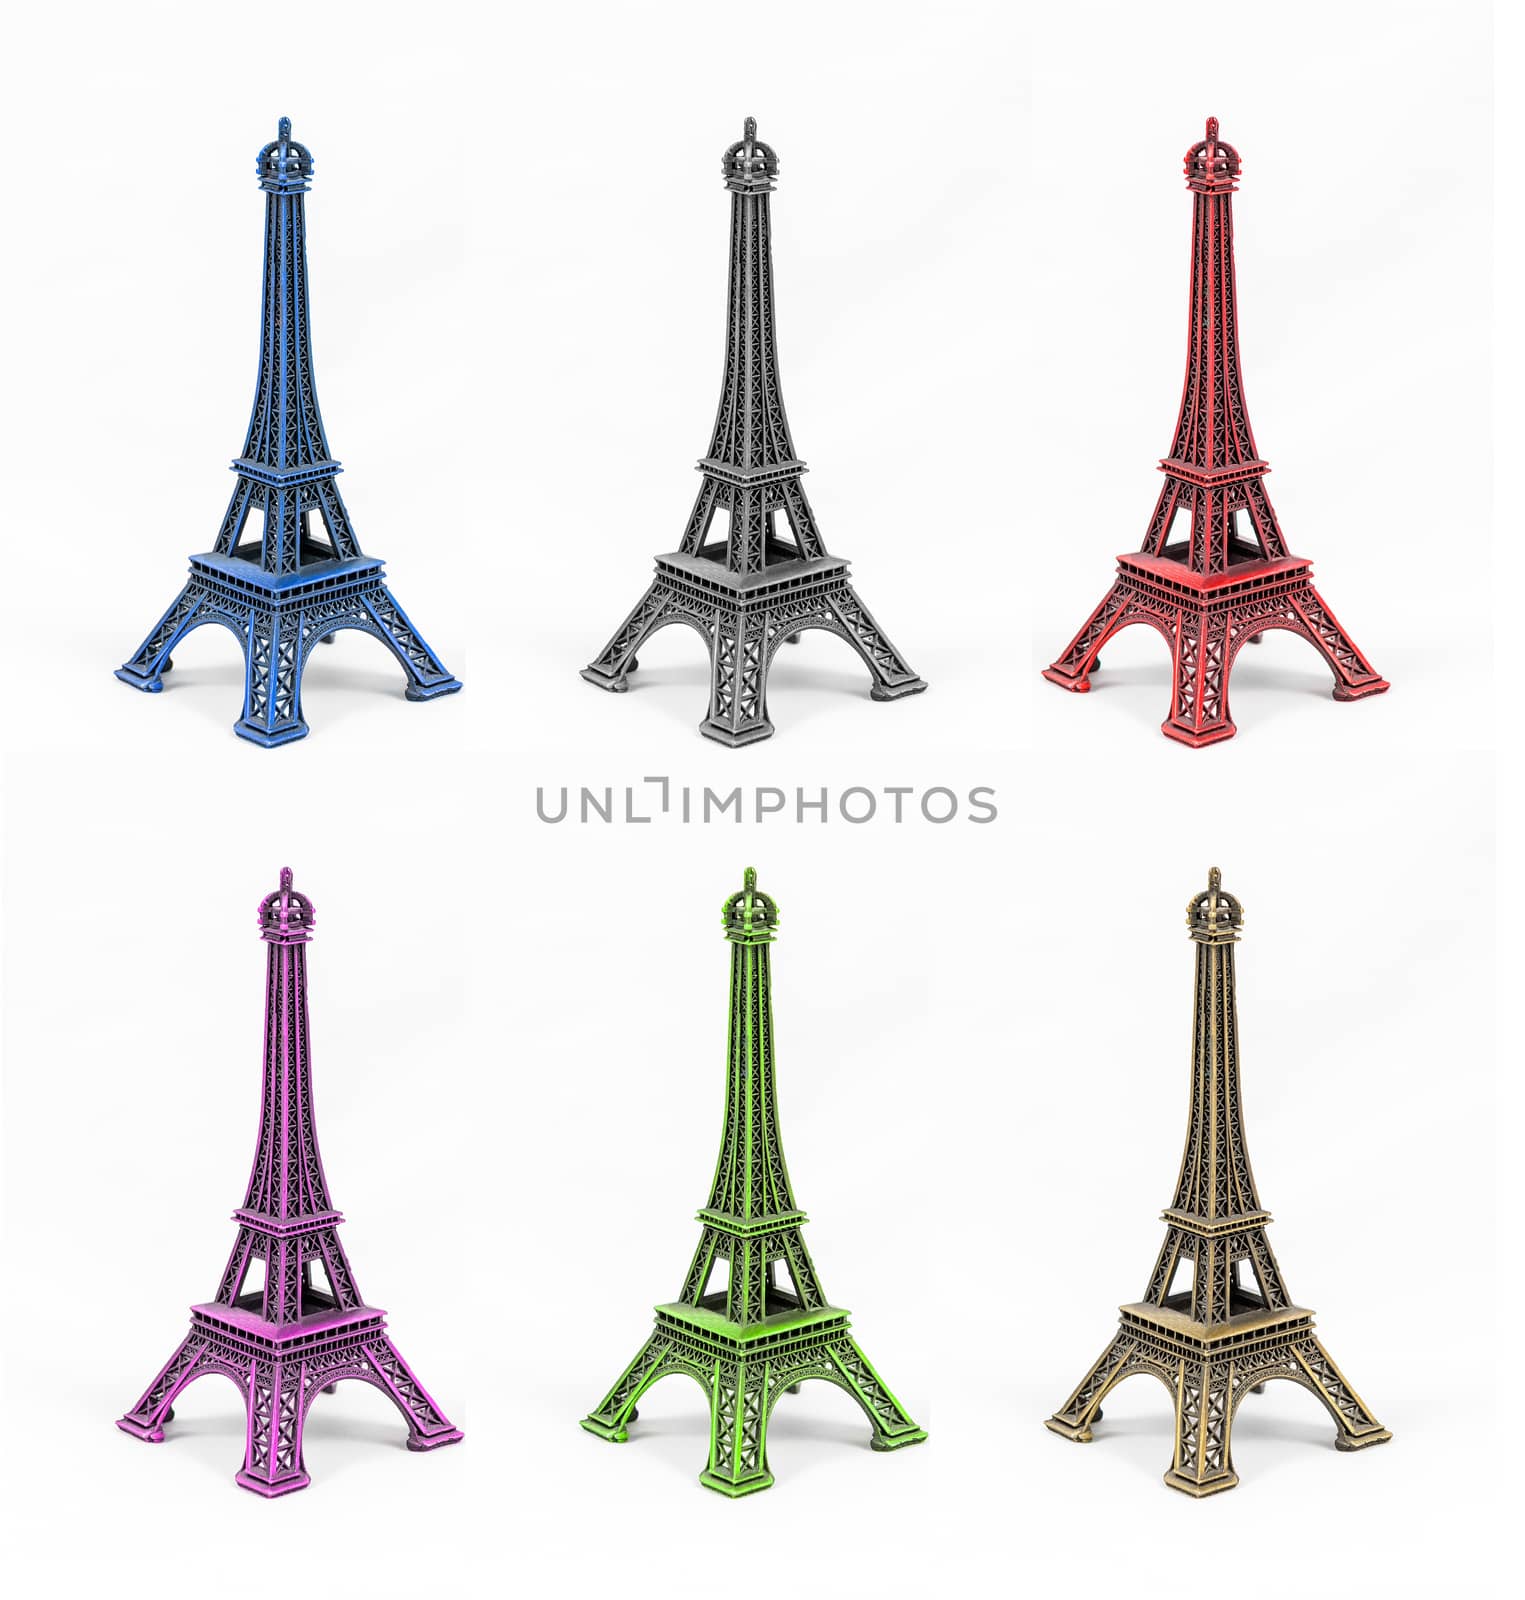 Six multicolored Eiffel Tower models, isolated on white background. Concept for multiethnic Paris